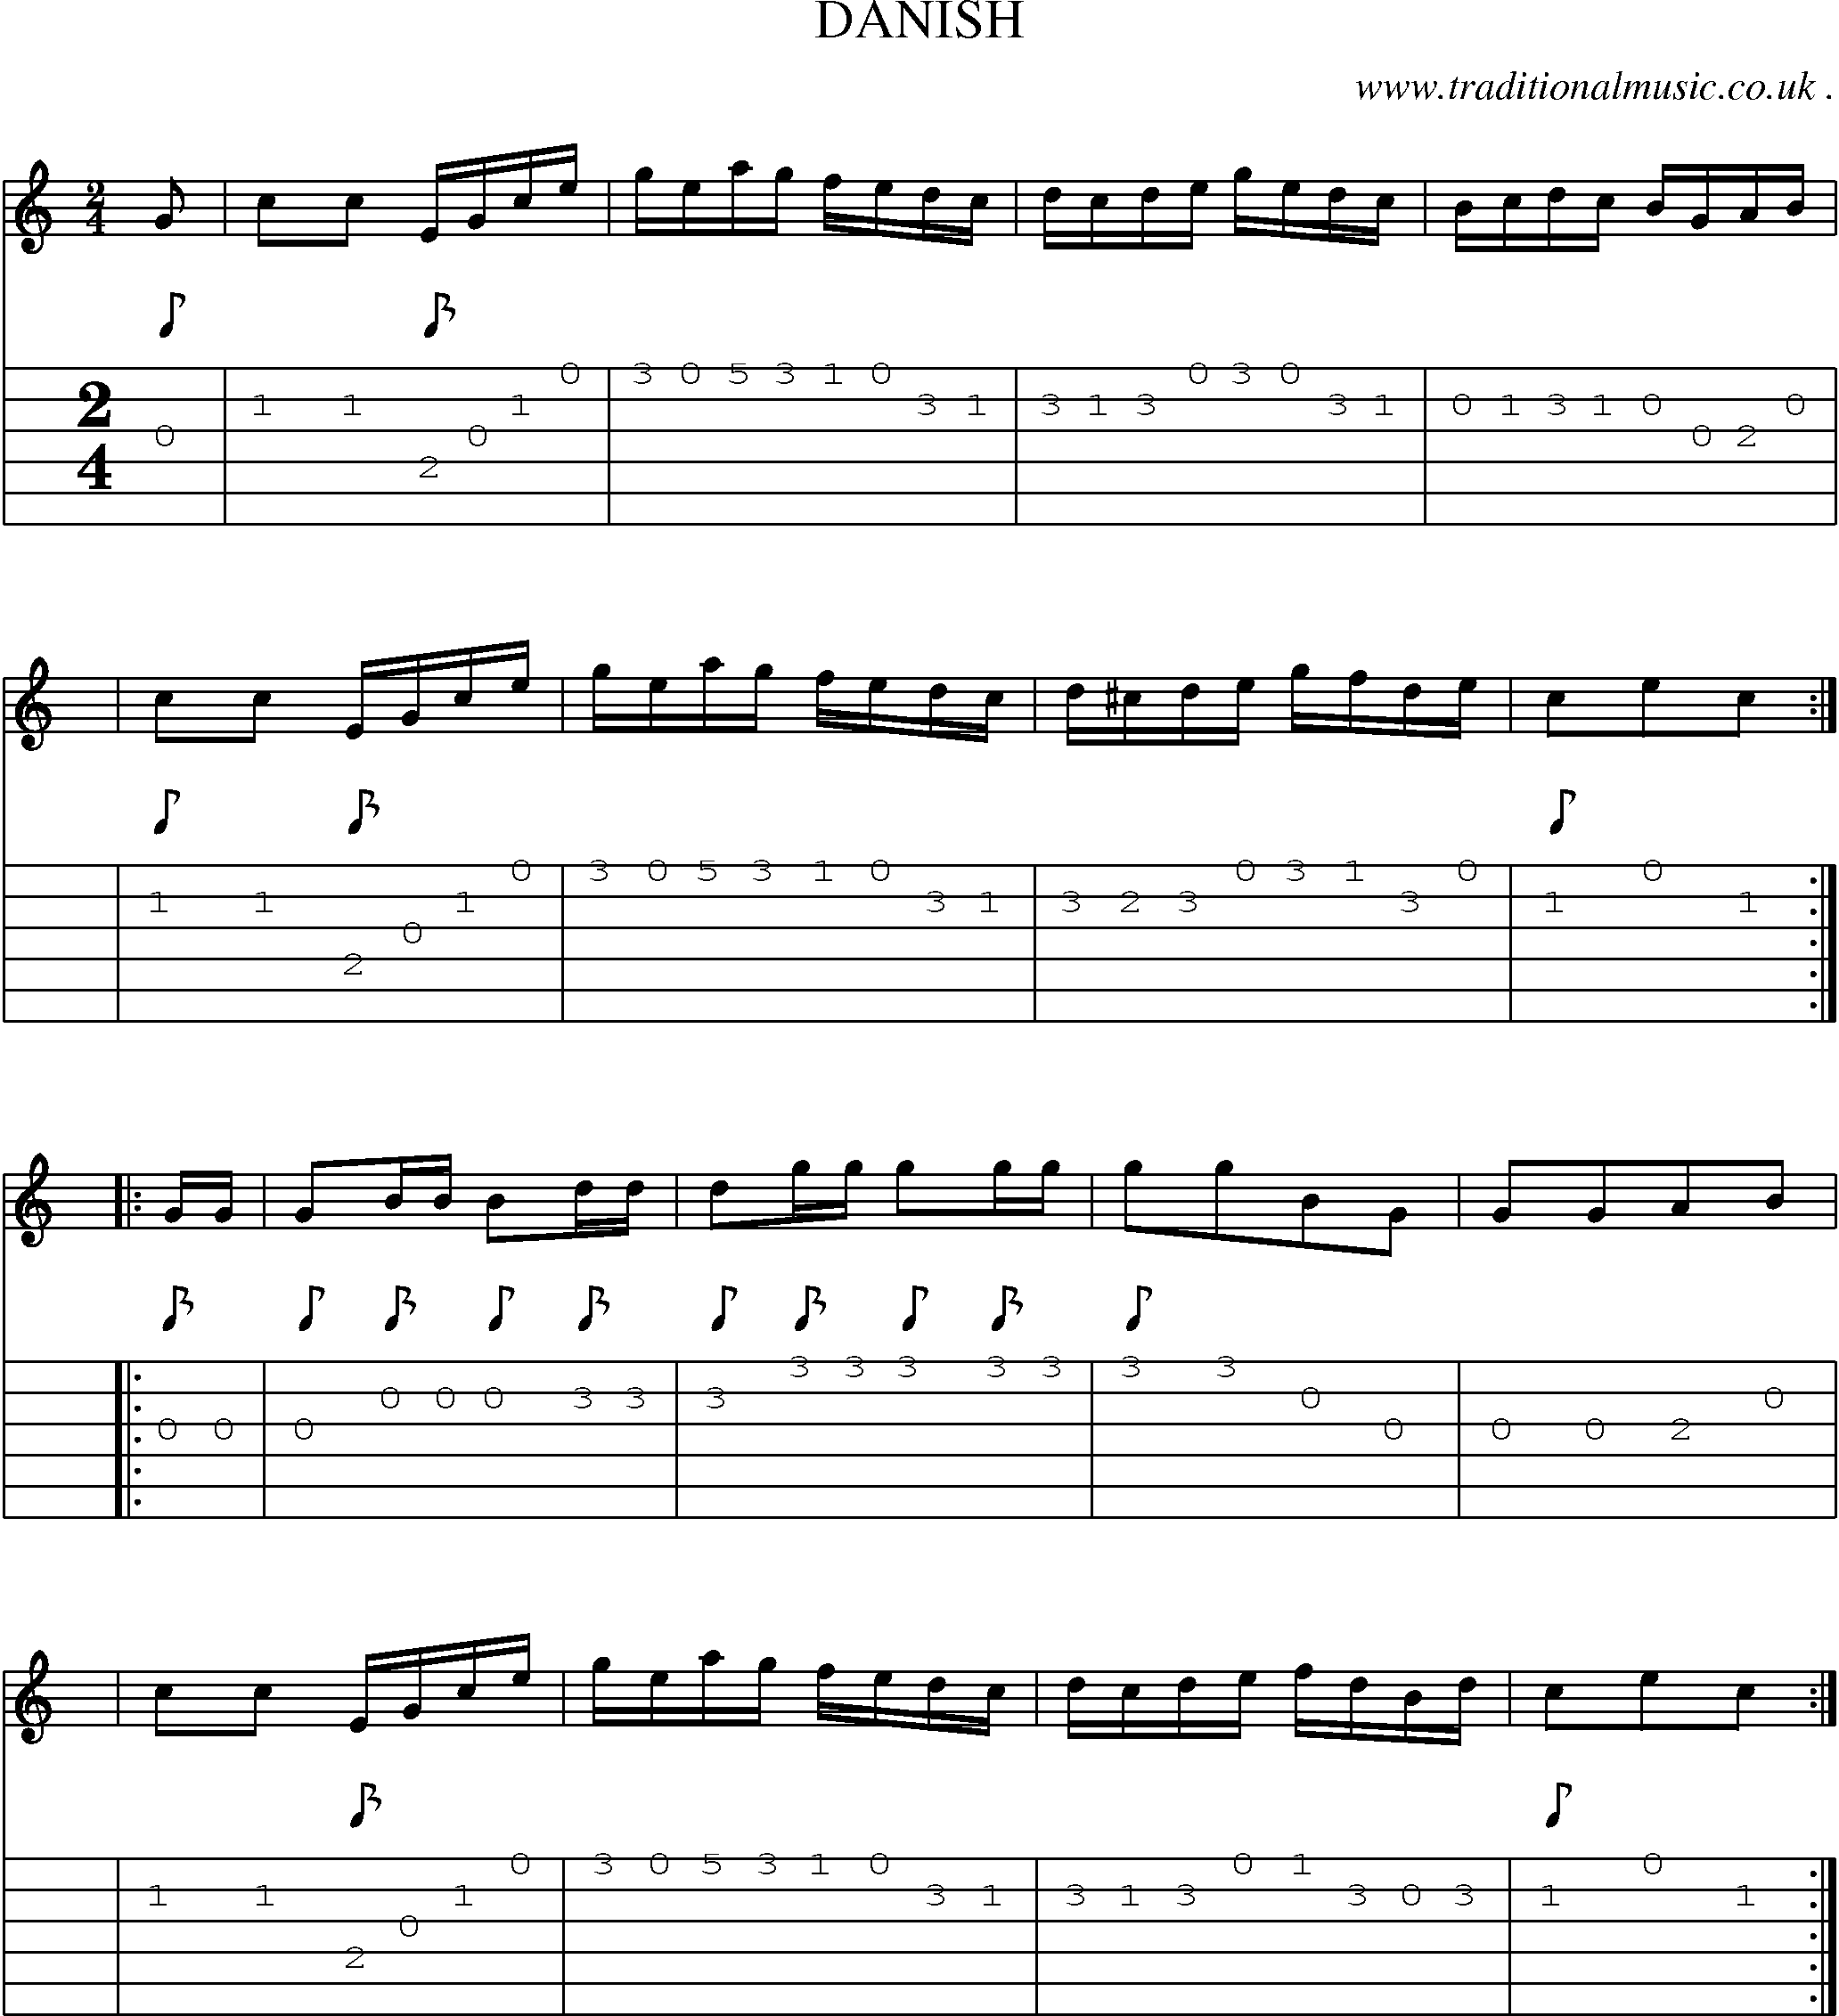 Sheet-Music and Guitar Tabs for Danish